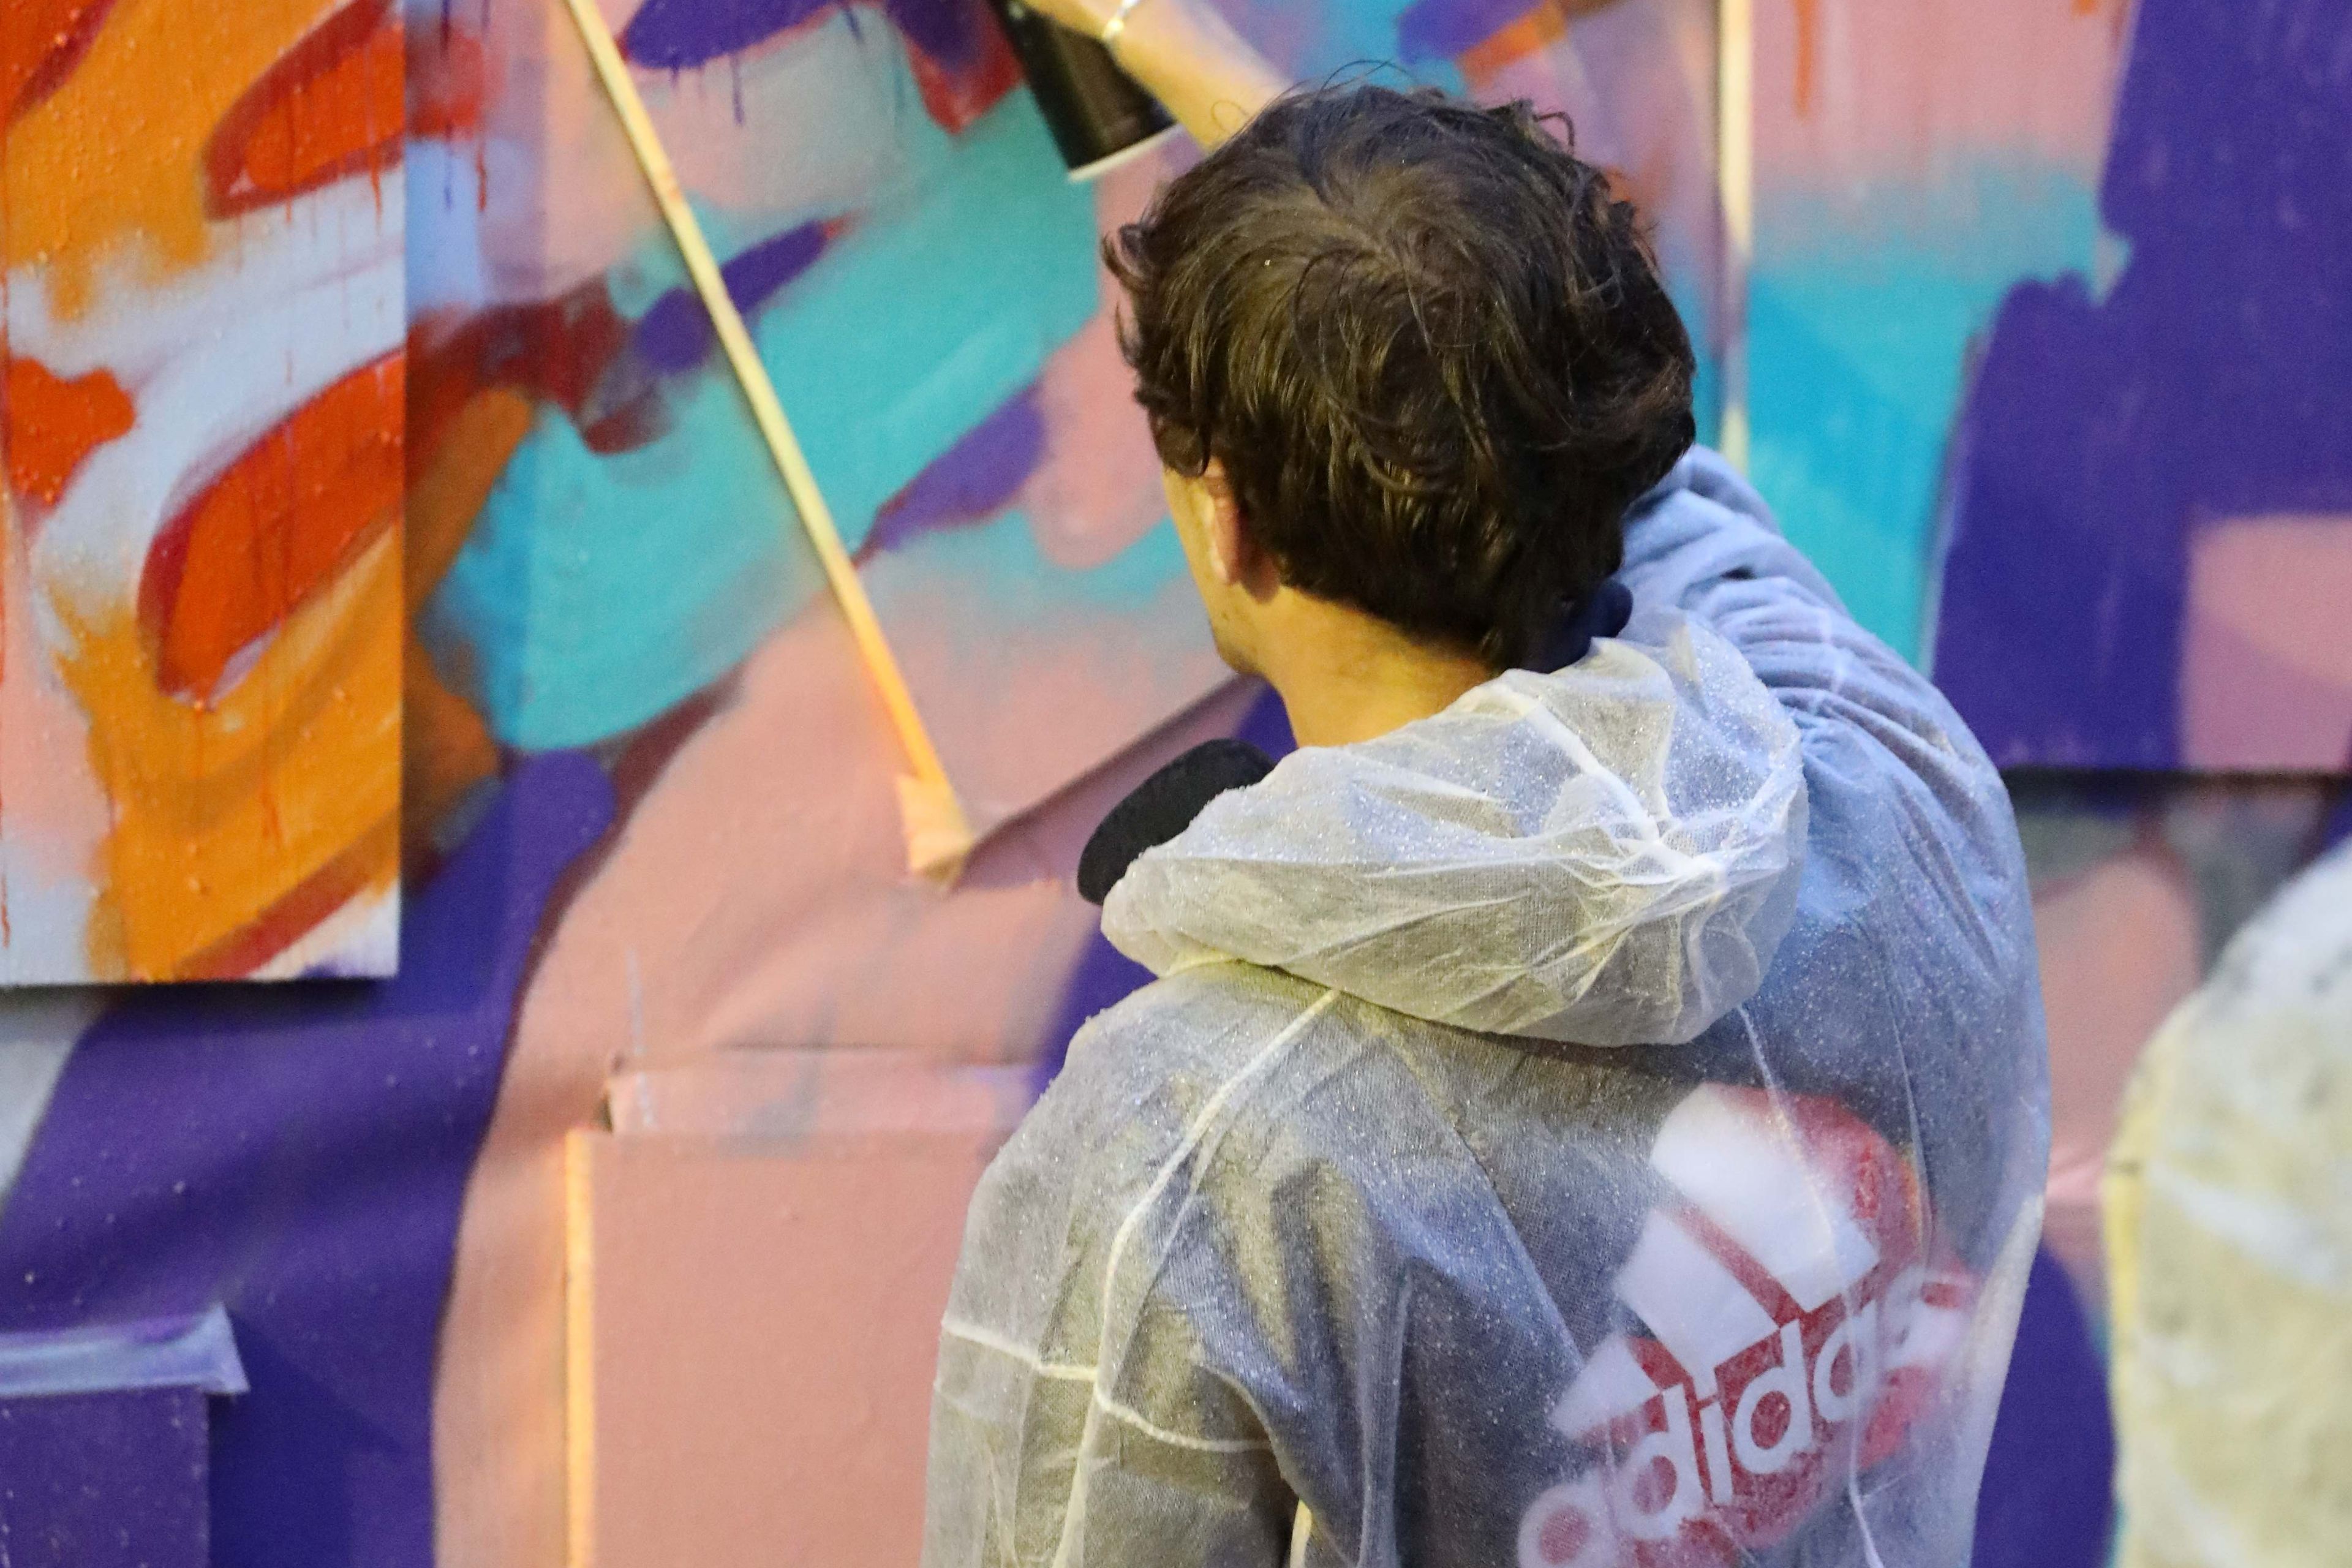 Boy spraying graffiti at the ‘ON THE SPOT’ exhibition workshop.